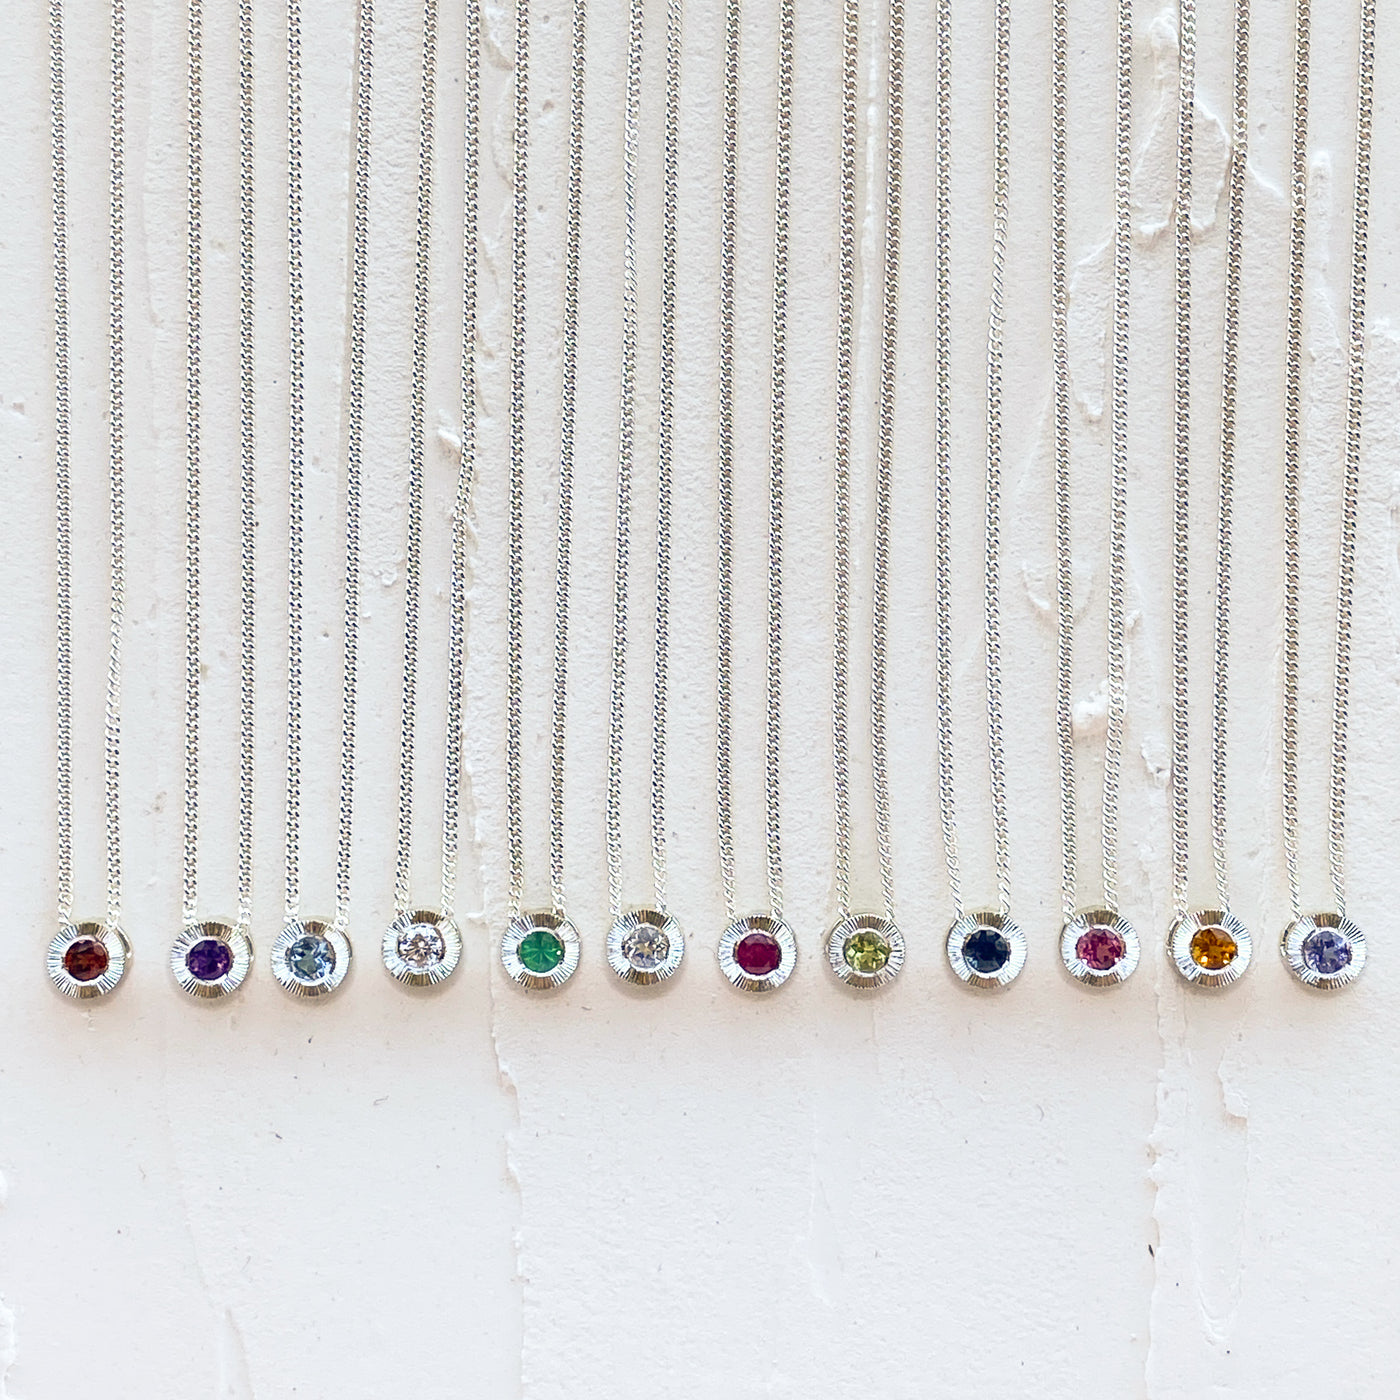 Sterling silver aurora necklaces with birthstones garnet for January,  amethyst for February, aquamarine for March, diamond for April, emerald for May, moonstone for June, ruby for July, peridot for August, blue sapphire for September, pink tourmaline for October, citrine for November, and tanzanite for December